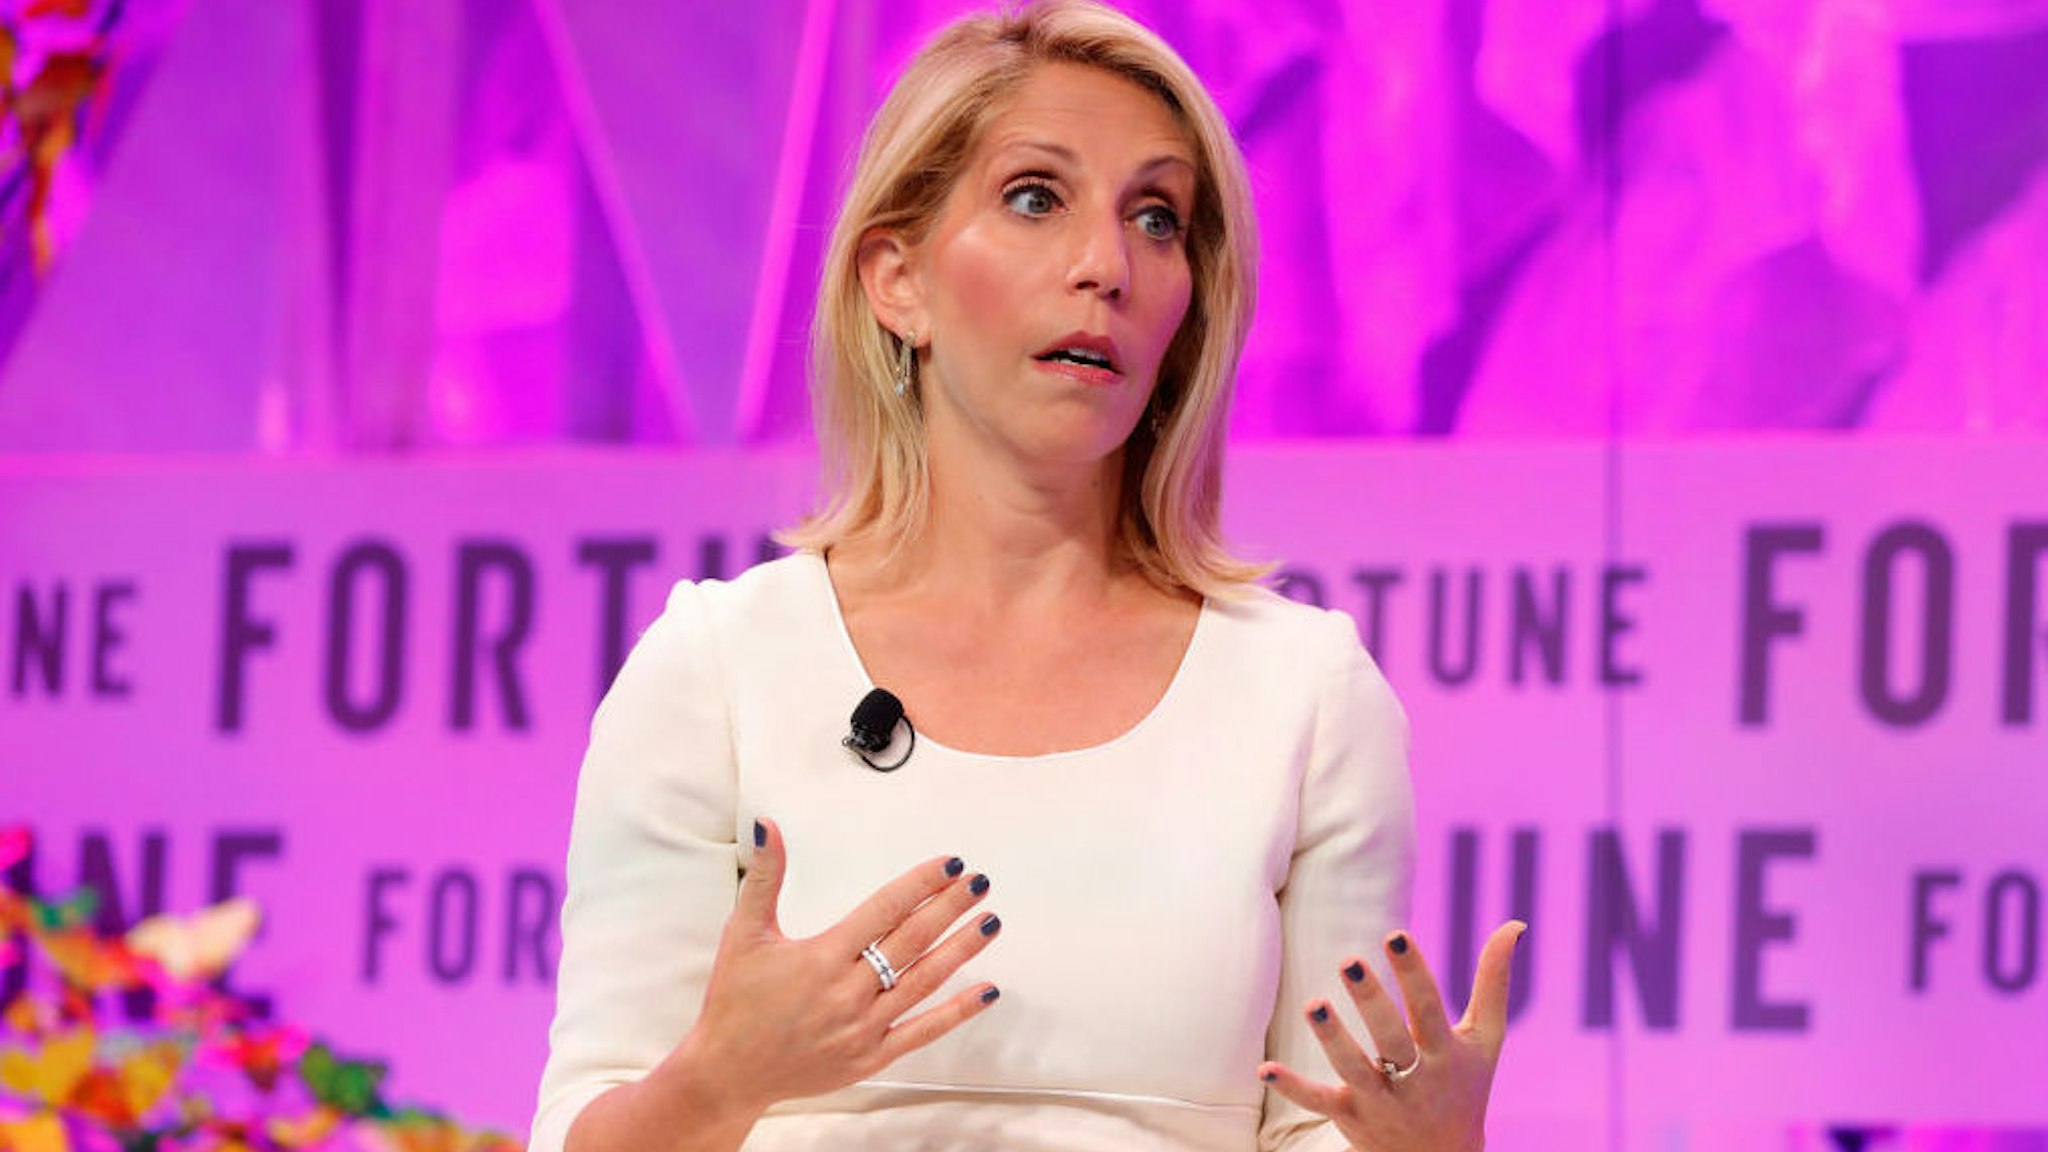 CNN Chief Political Correspondent Dana Bash speaks onstage at the Fortune Most Powerful Women Summit - Day 3 on October 11, 2017 in Washington, DC.